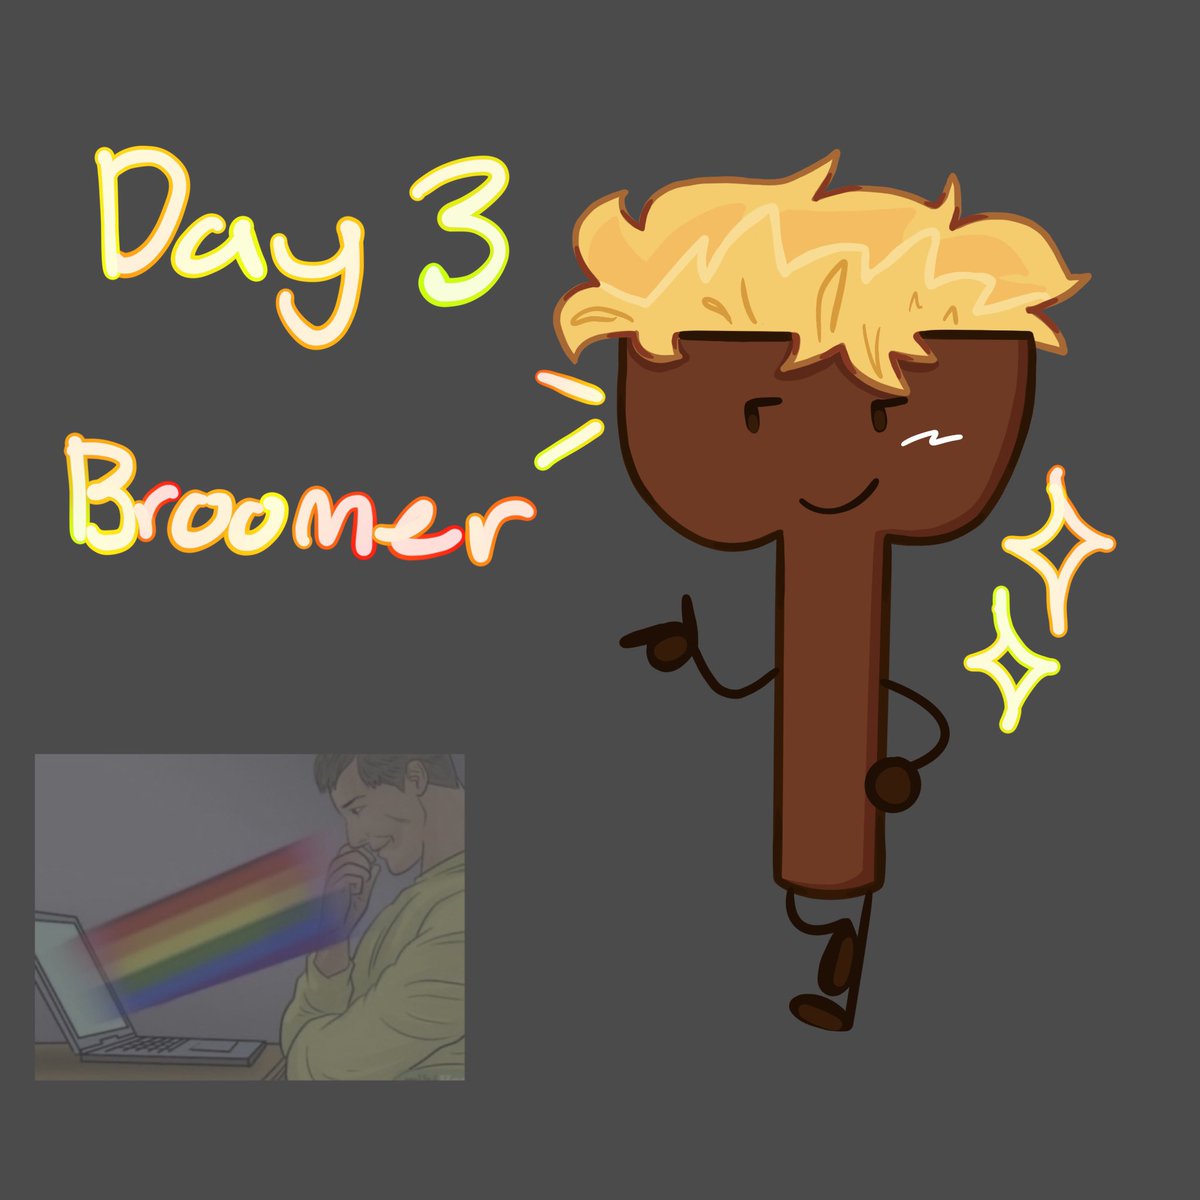 Day 3 - Broomer

Drawing my favorite character from different object shows till the Bfdi x II meetup (But I started very late💀)

Listen to the broomer boys now #EEE #osc #fanart #excellententities